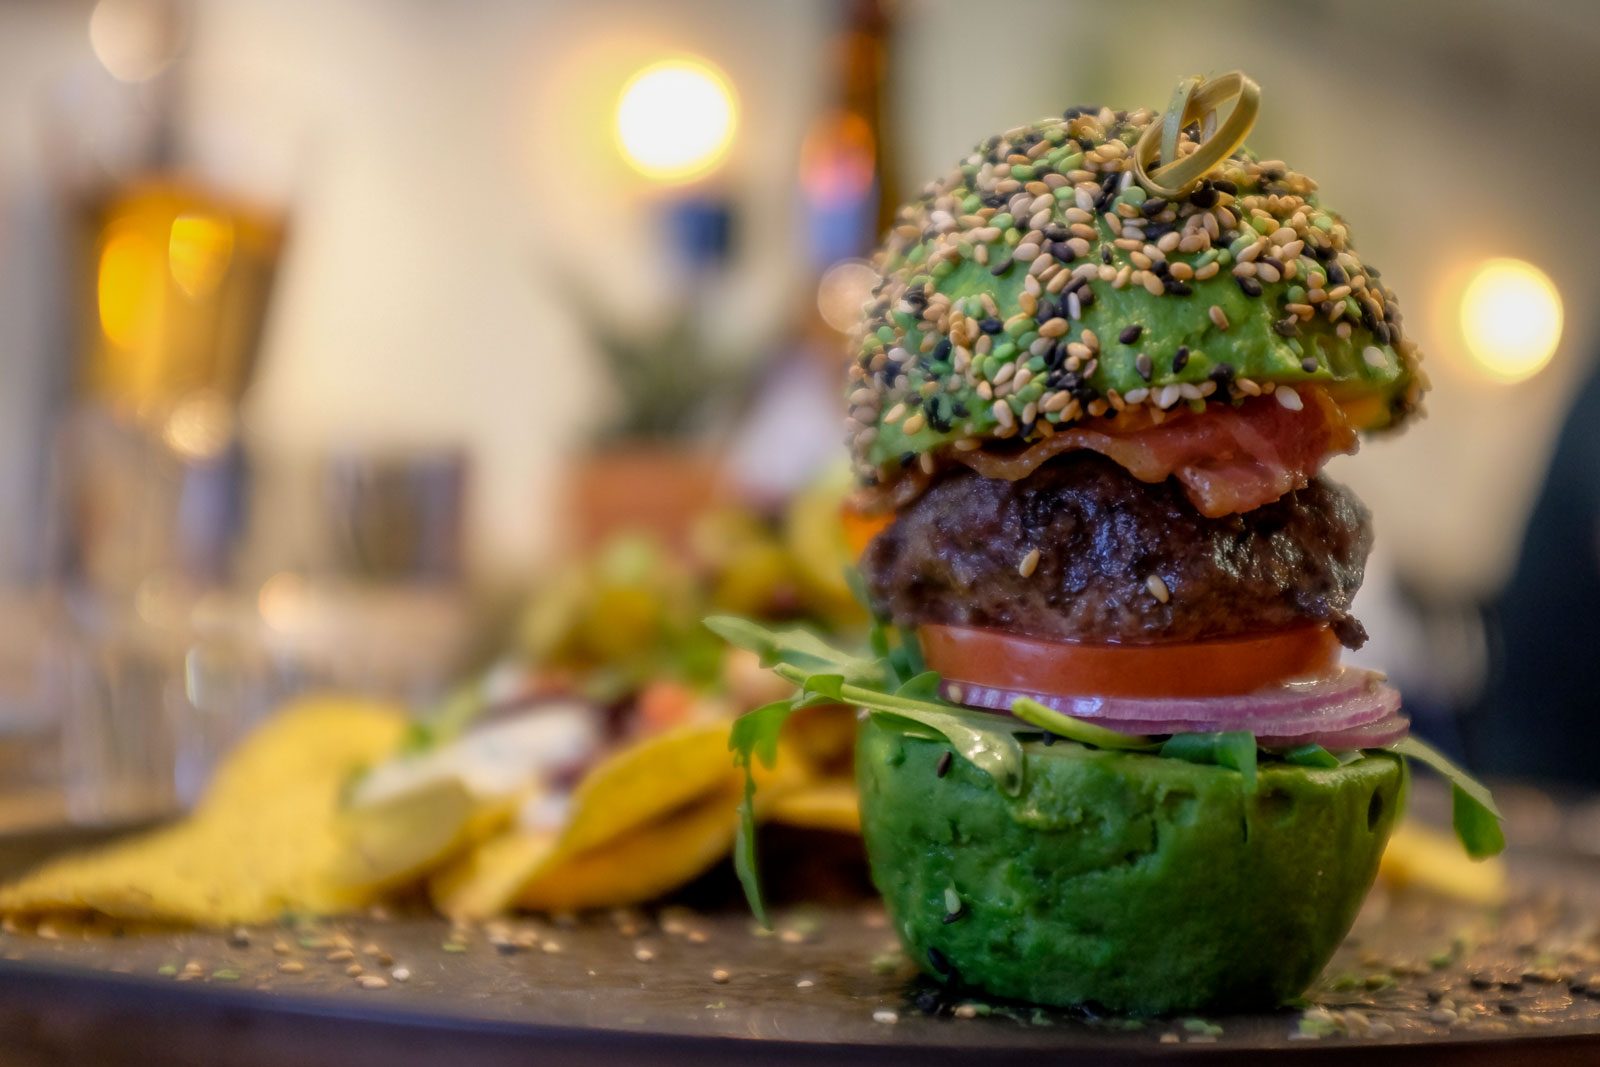 The Wagyu Burger from Avocado Show in Amsterdam